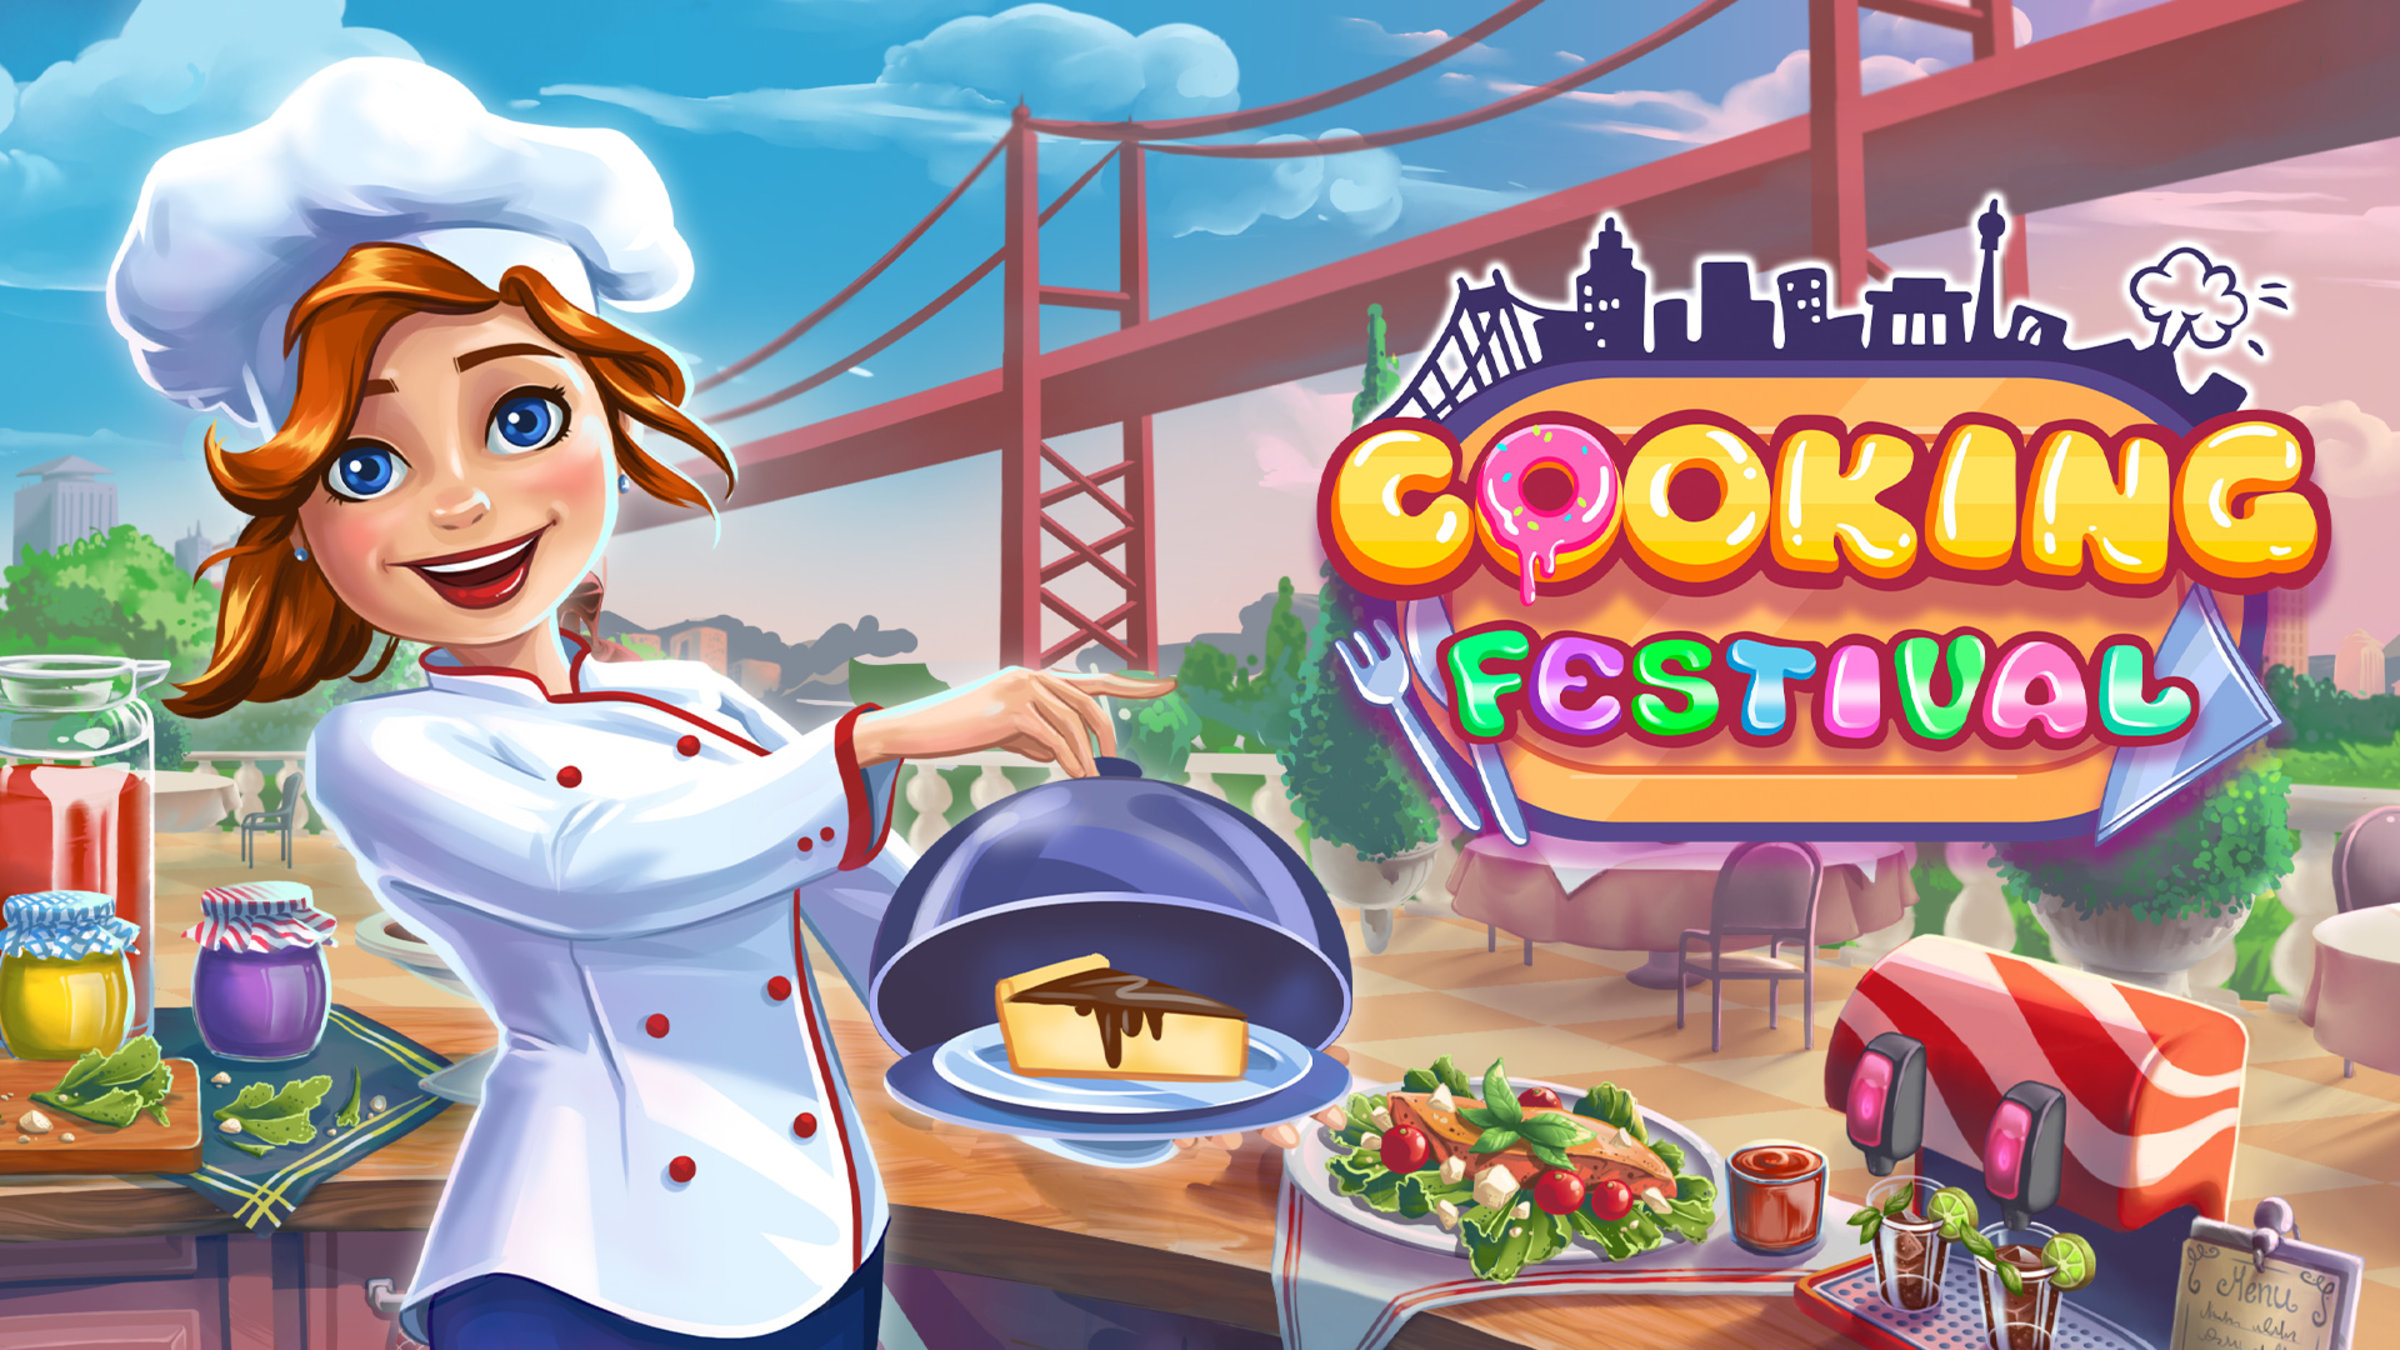 Cooking Festival for Nintendo Switch - Nintendo Official Site